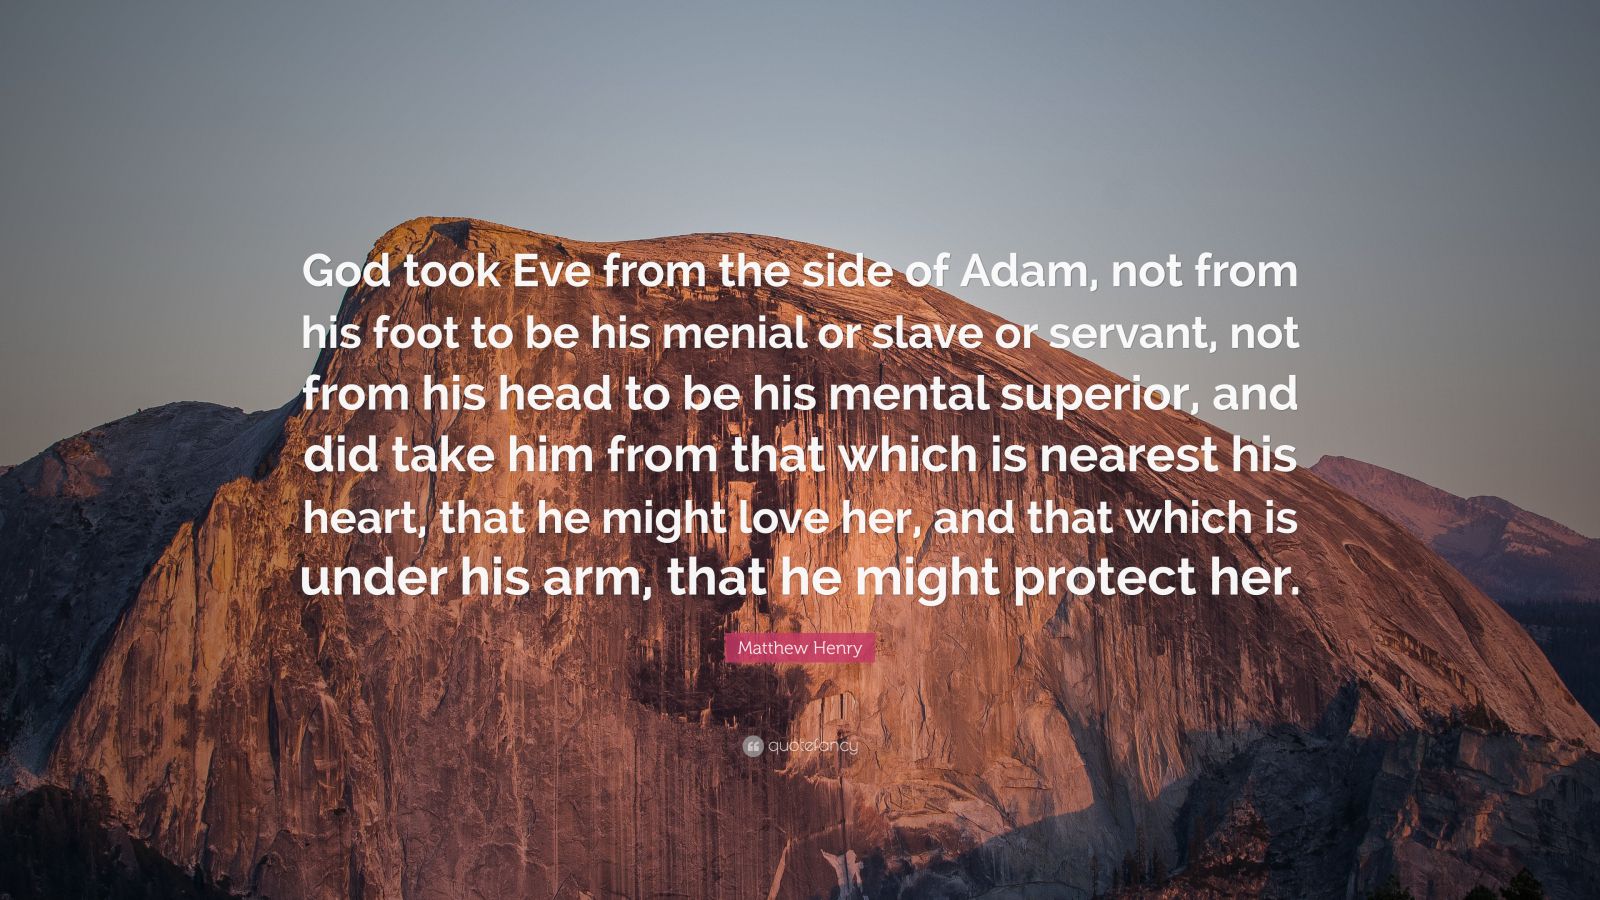 Matthew Henry Quote: "God took Eve from the side of Adam, not from his foot to be his menial or ...